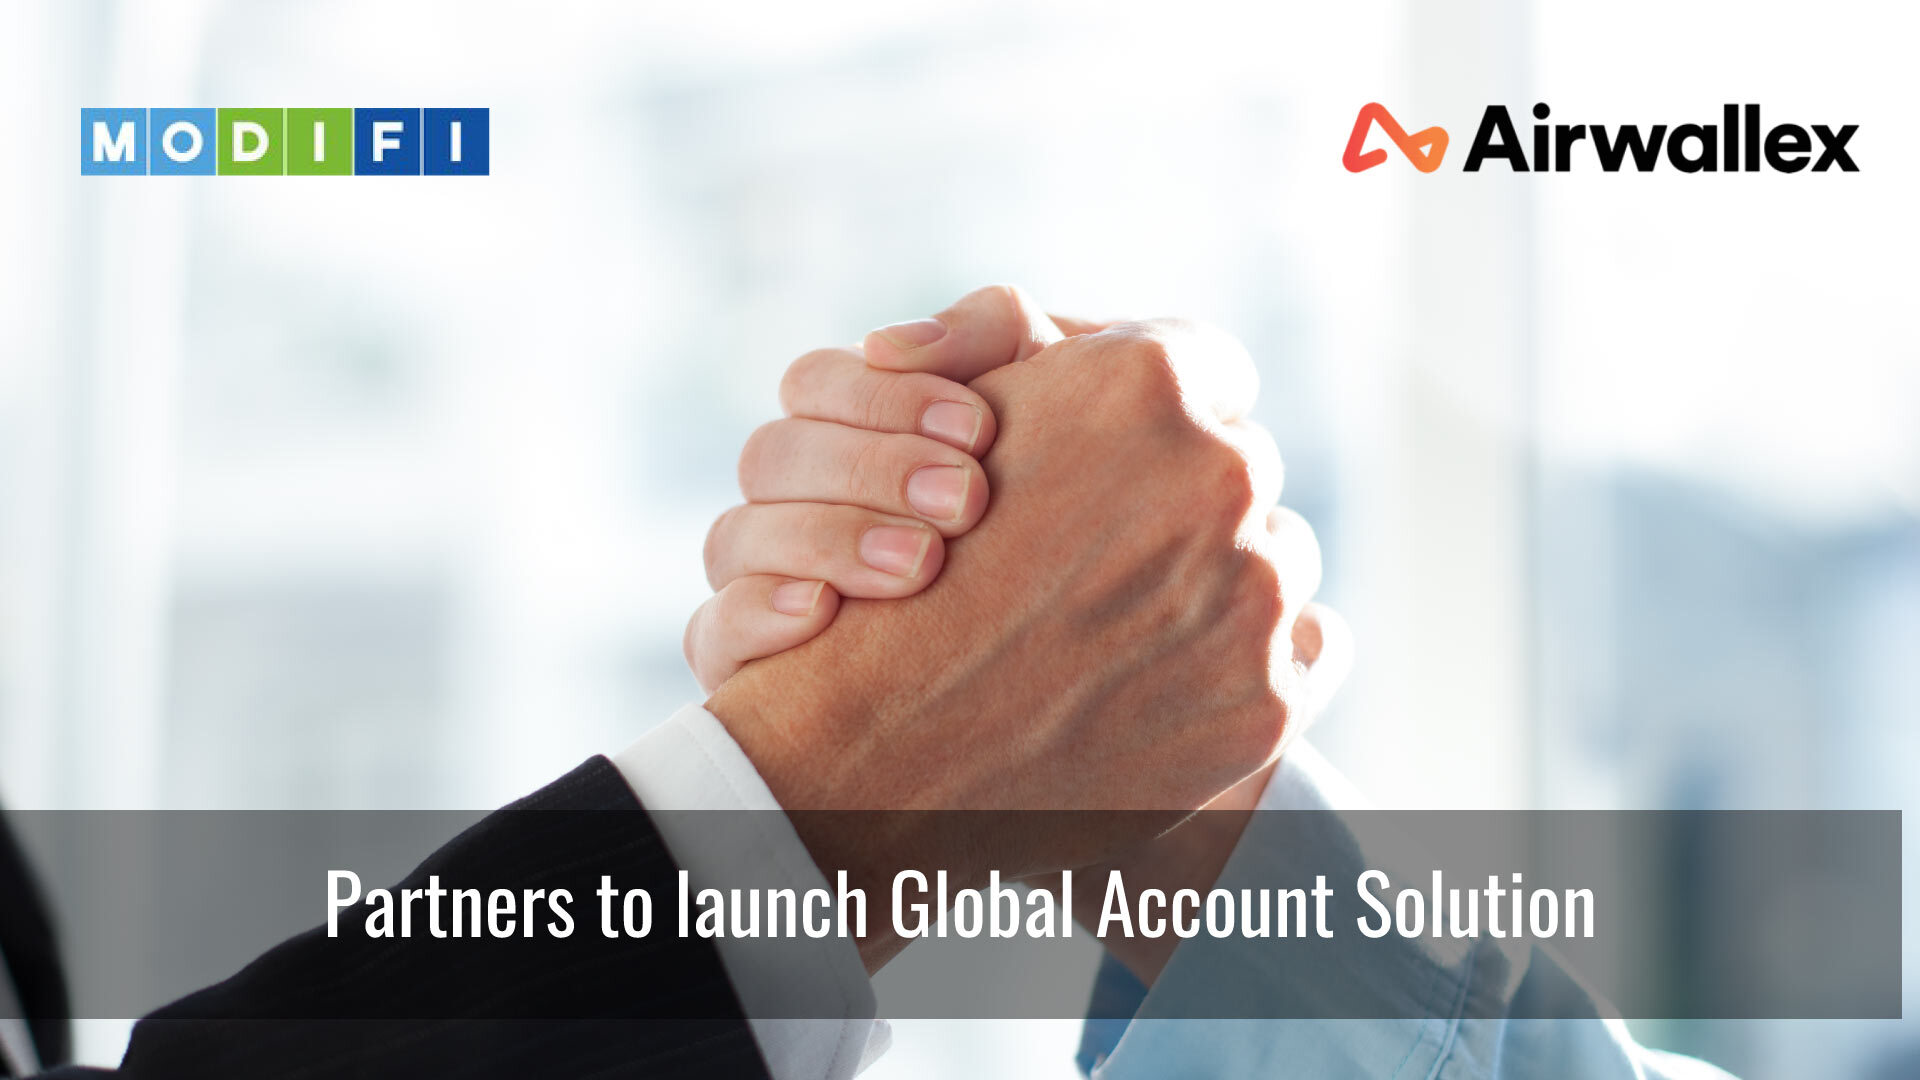 MODIFI partners with Airwallex to launch Global Account Solution for smooth and flexible cross-border B2B payments